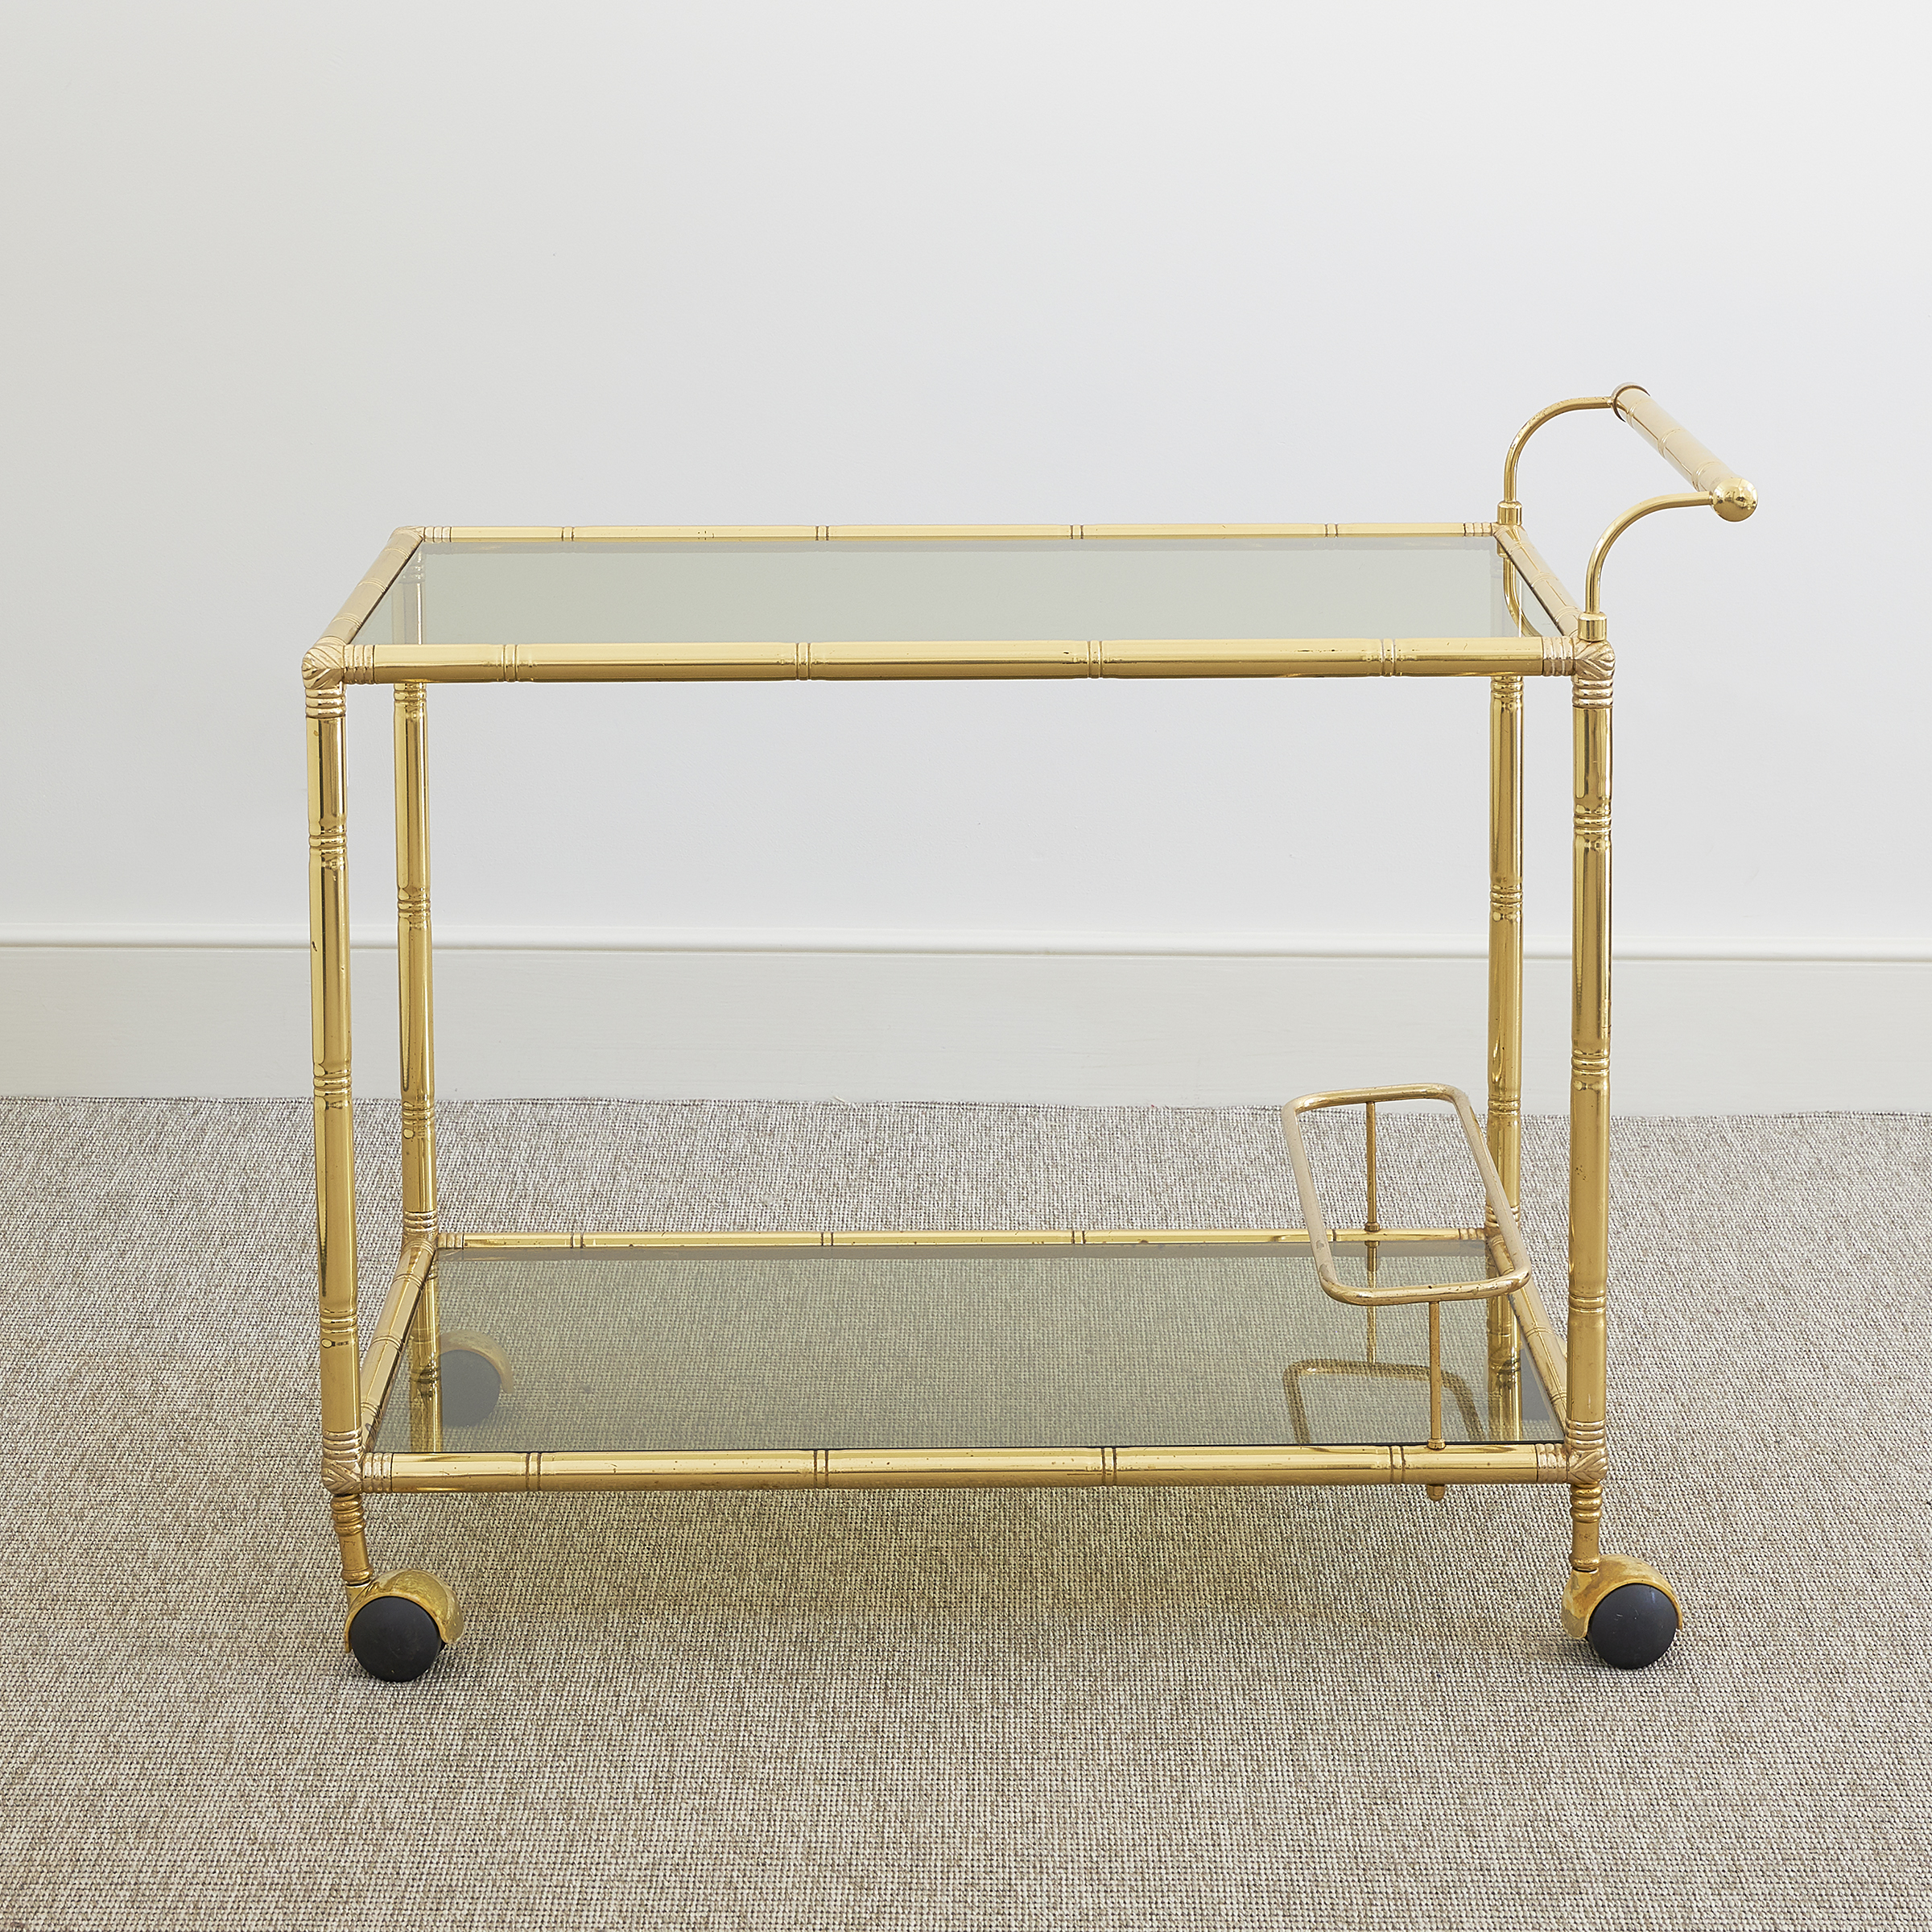 French bamboo design two-tier brass drinks trolley - BEAR Petworth